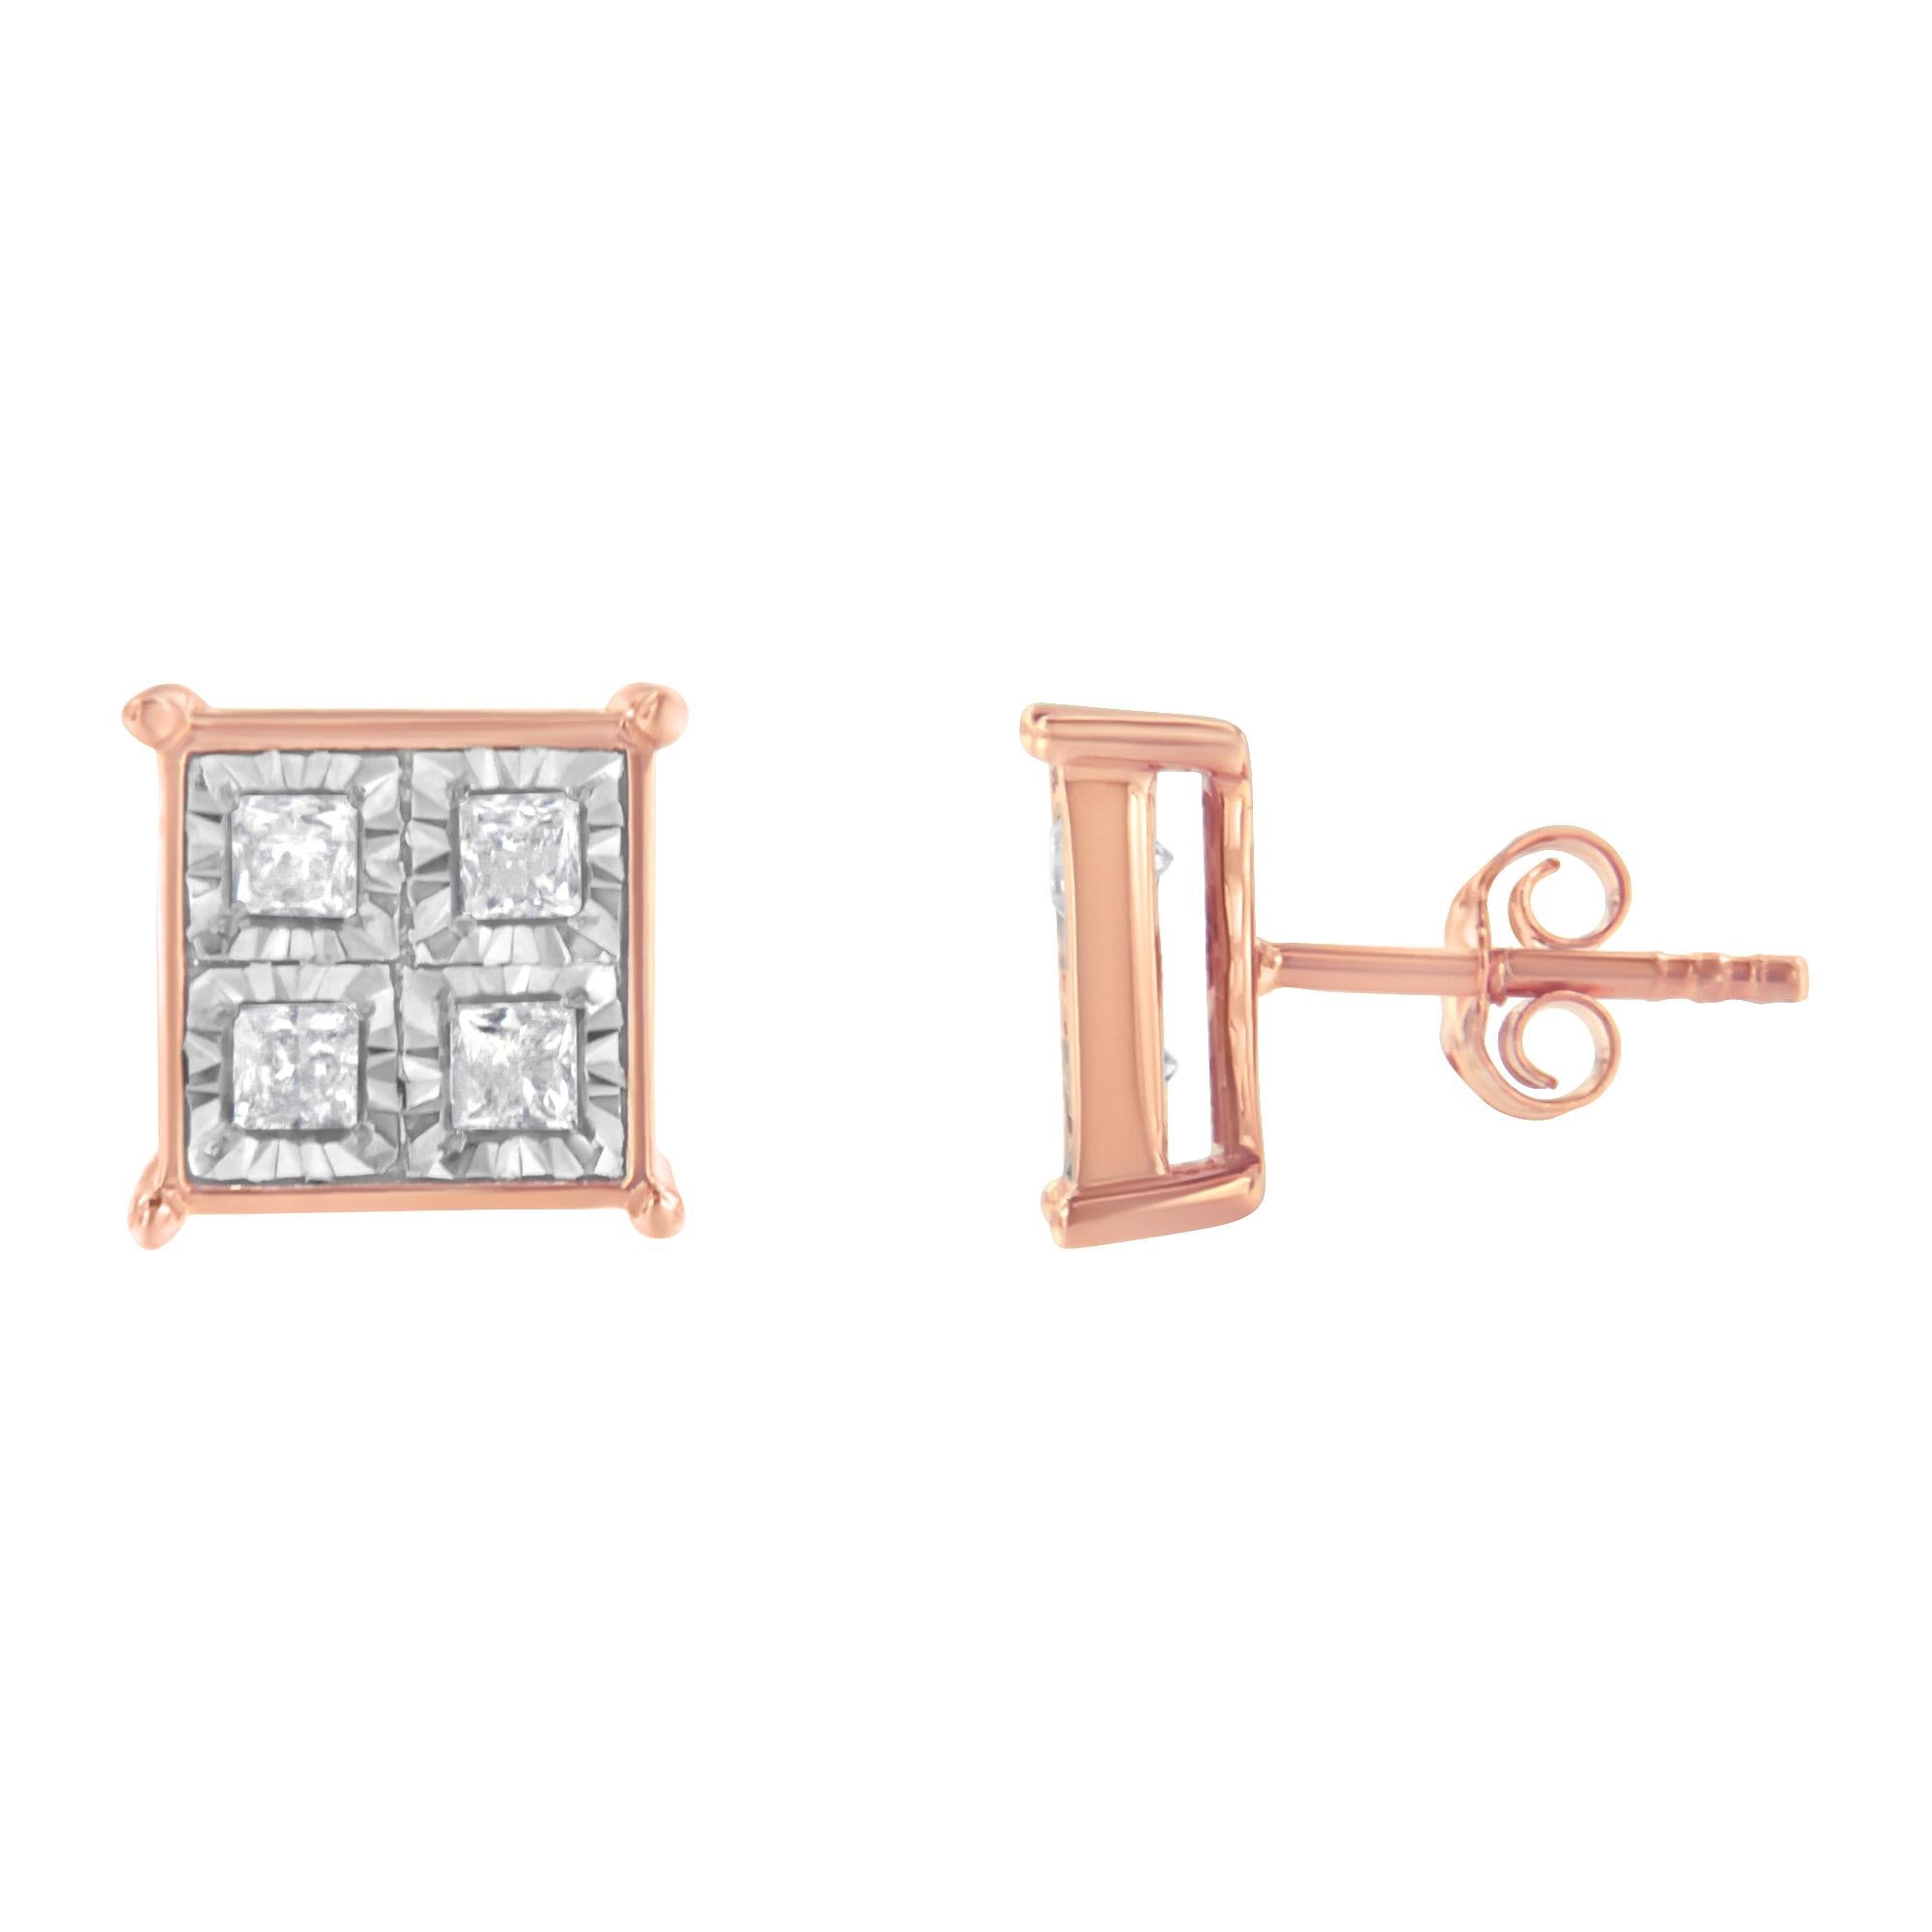 Fashioned in rose plated sterling silver these classic 3/4ct diamonds studs are a must have. Each earring showcases four miracle set princess cut diamonds neatly arranged in a square frame. The design is finished of with a secure back mechanism.